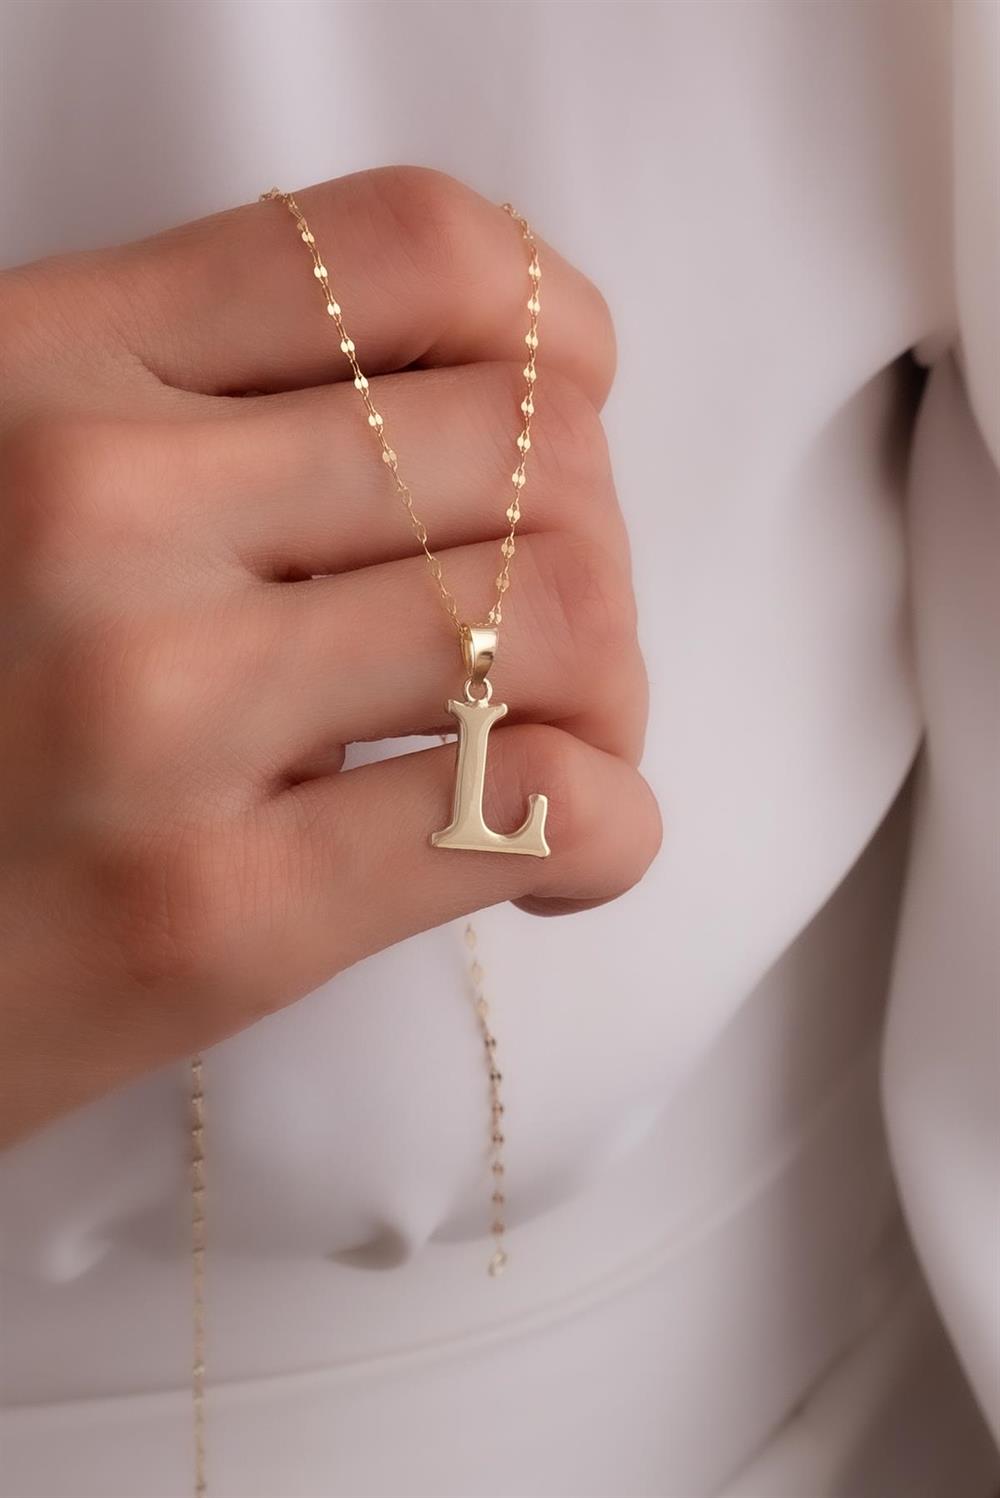 Letter L Necklace Solid Gold 14k Initial L Necklace Tiny Small Dainty  Layering Necklace Personalized Jewelry Gifts - Etsy